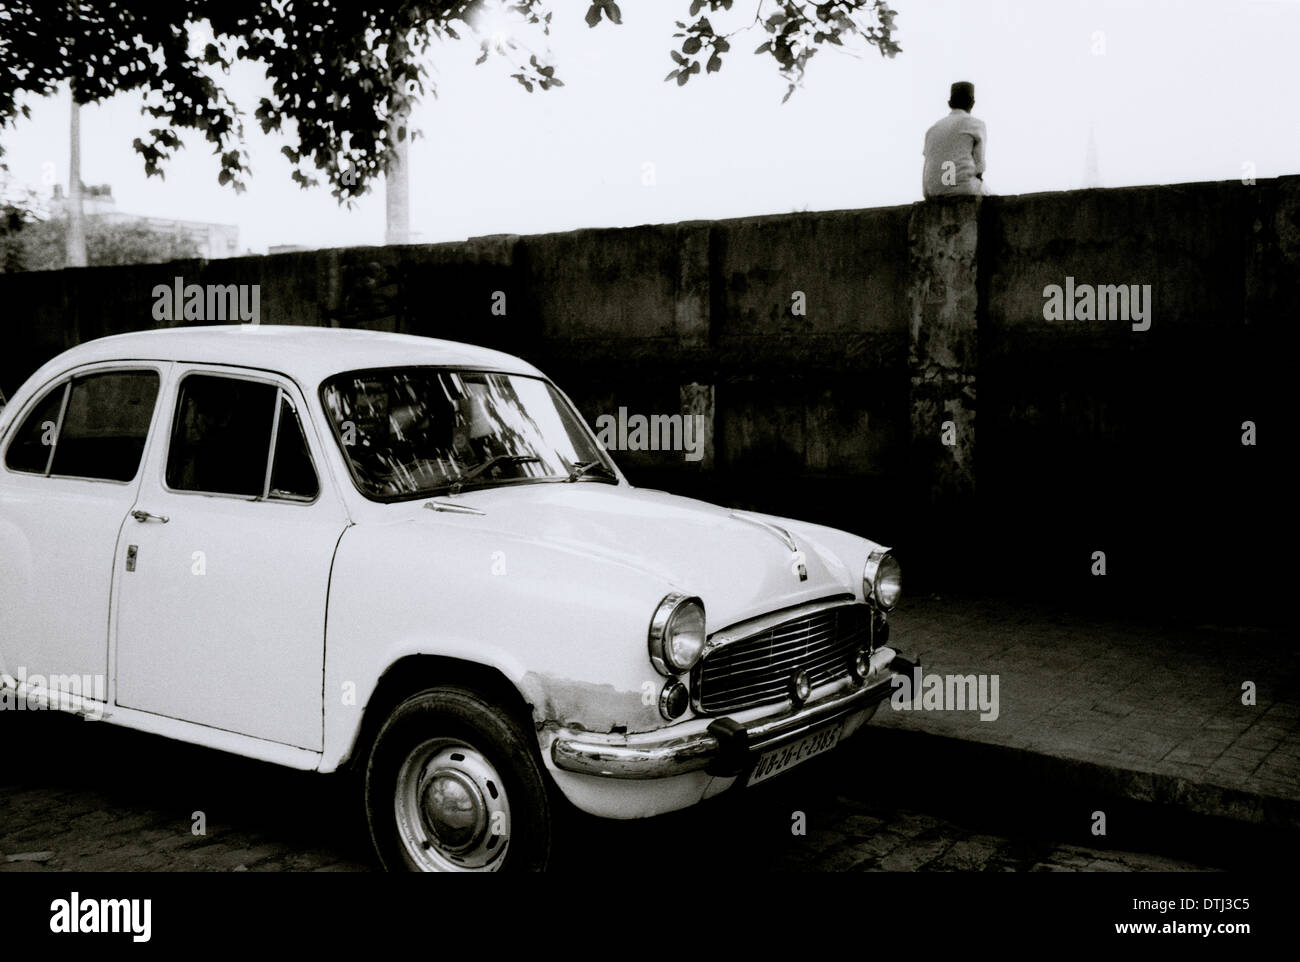 Hindustan Ambassador car in Kolkata Calcutta in West Bengal in India in South Asia. Surreal Surrealism Cars Transport History Indian Travel Stock Photo